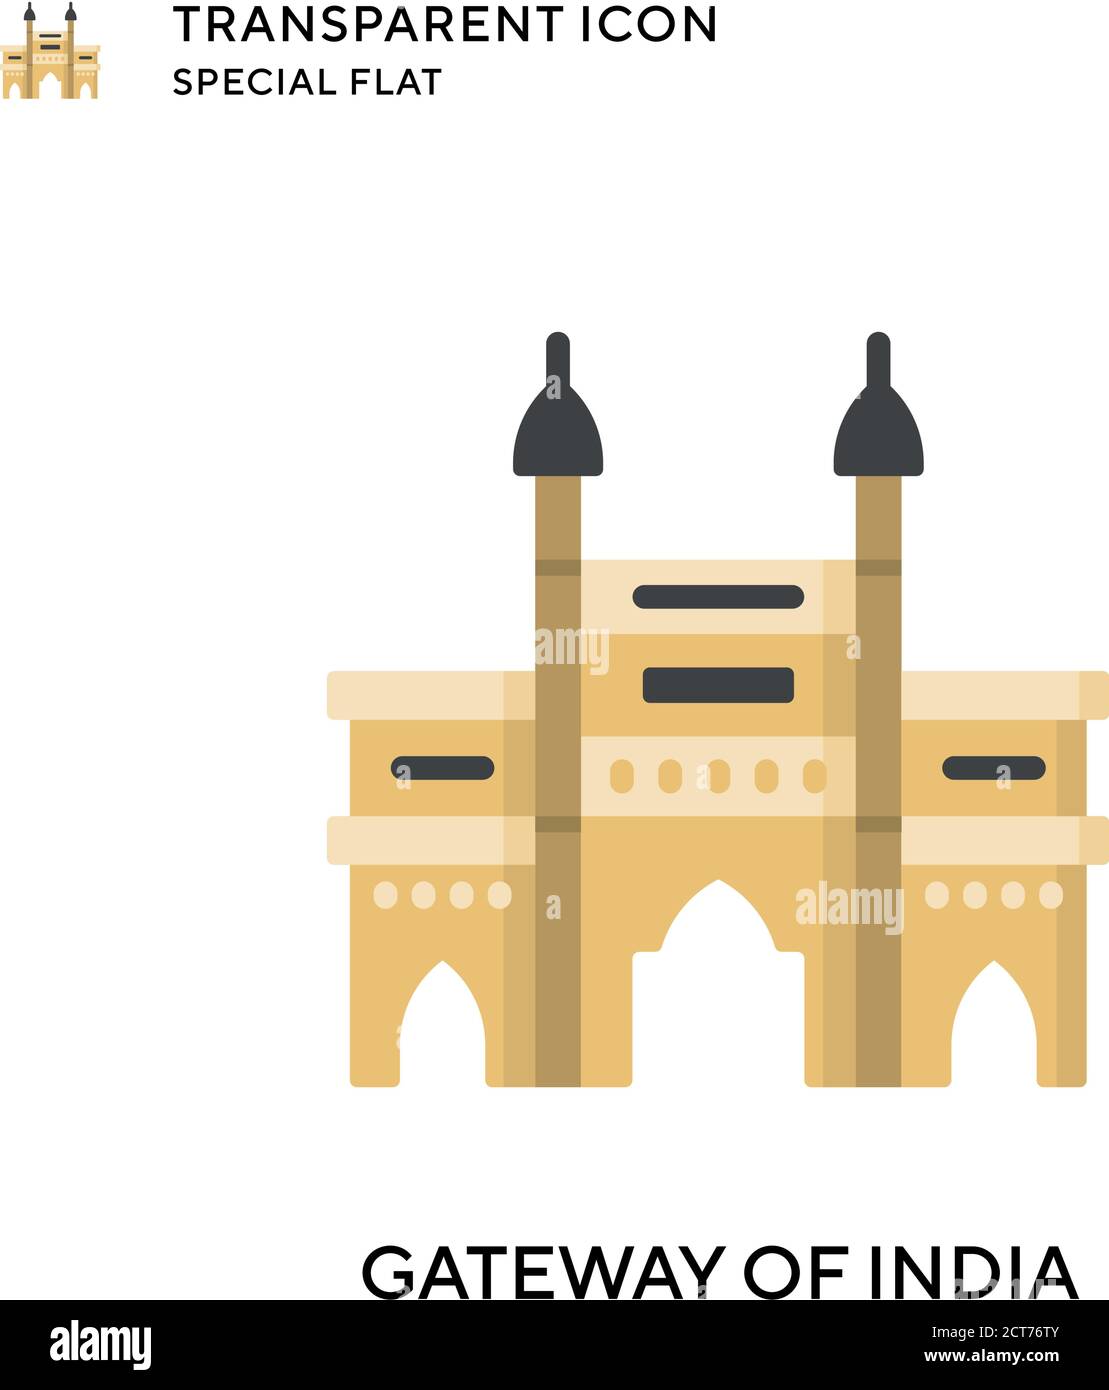 Gateway of india vector icon. Flat style illustration. EPS 10 vector. Stock Vector